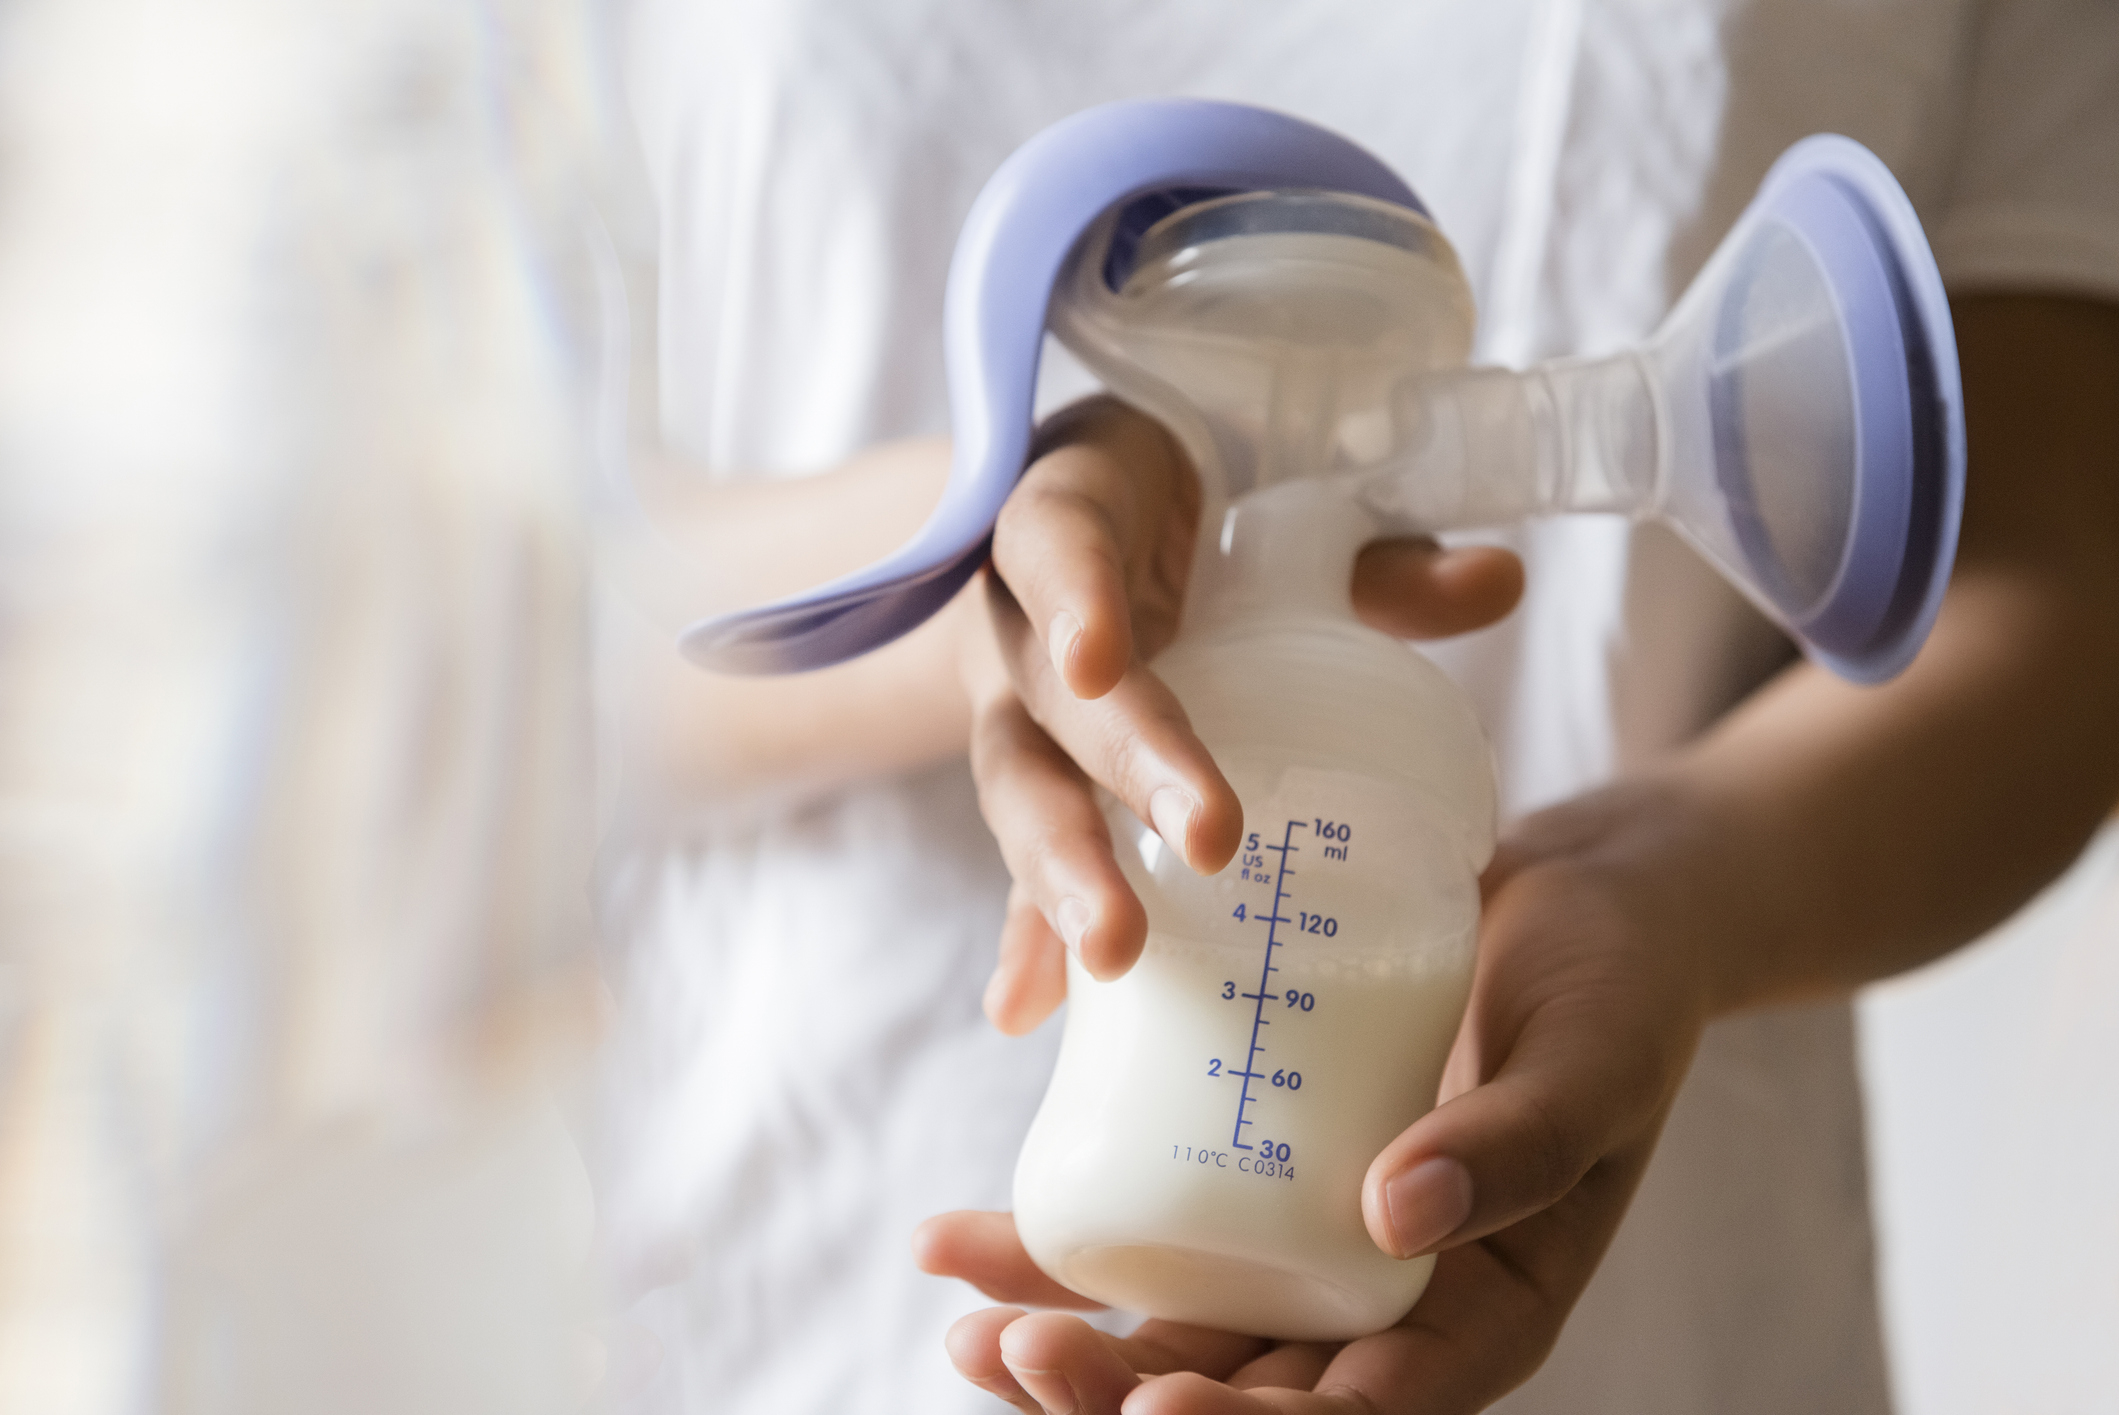 Person using a manual breast pump to express milk into a bottle